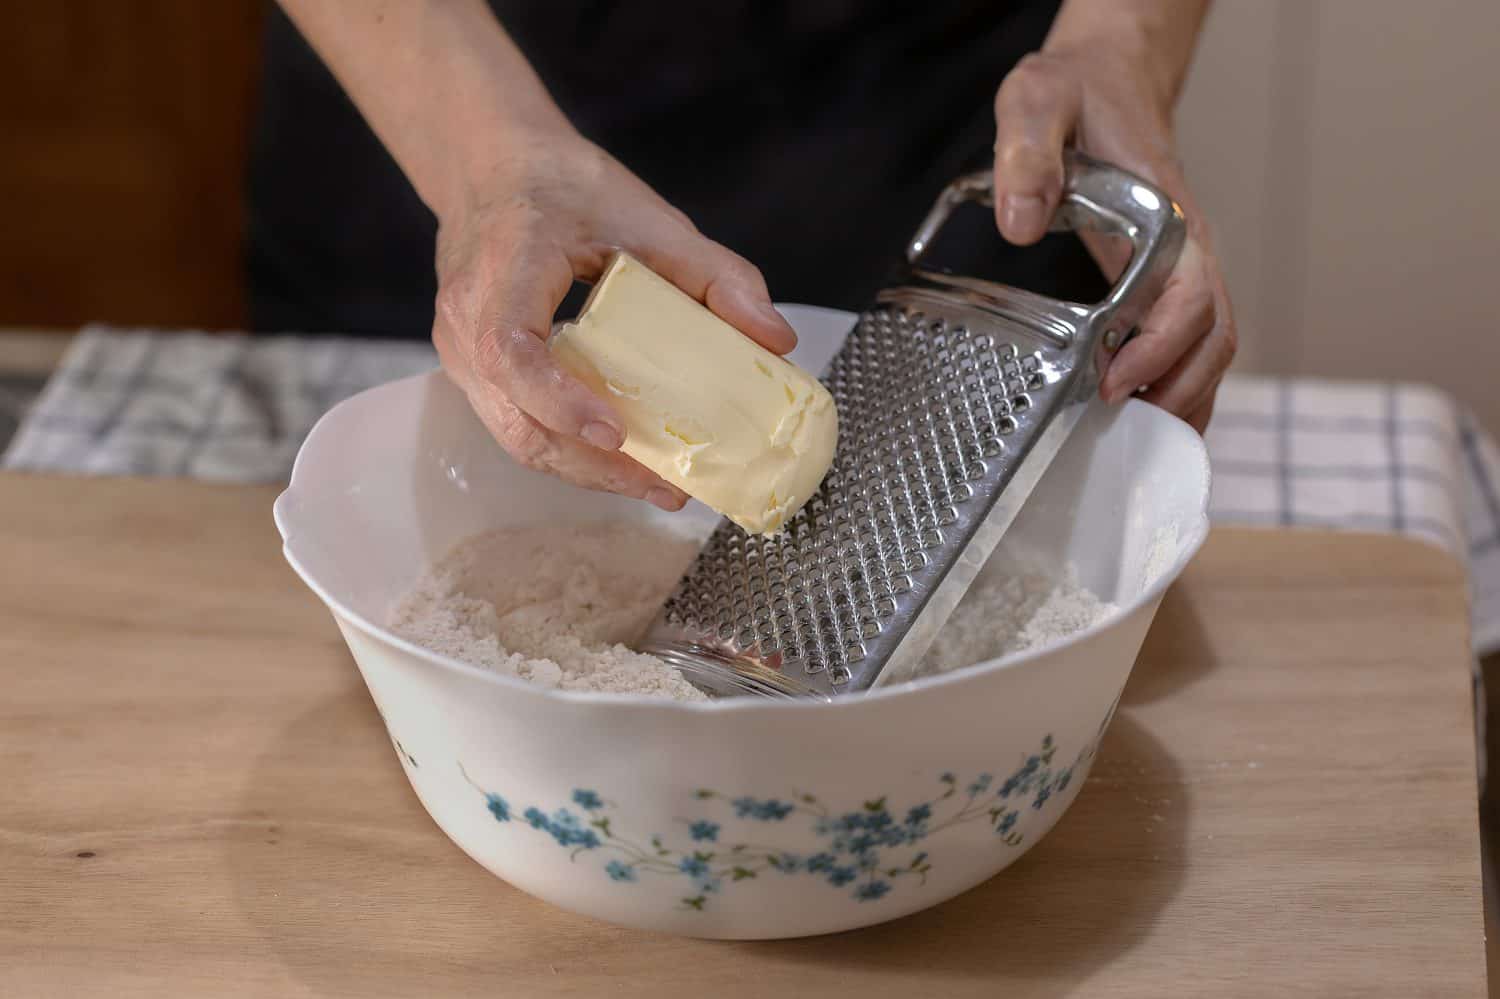 Female hands grating a pat of butter over some flour in a bowl.